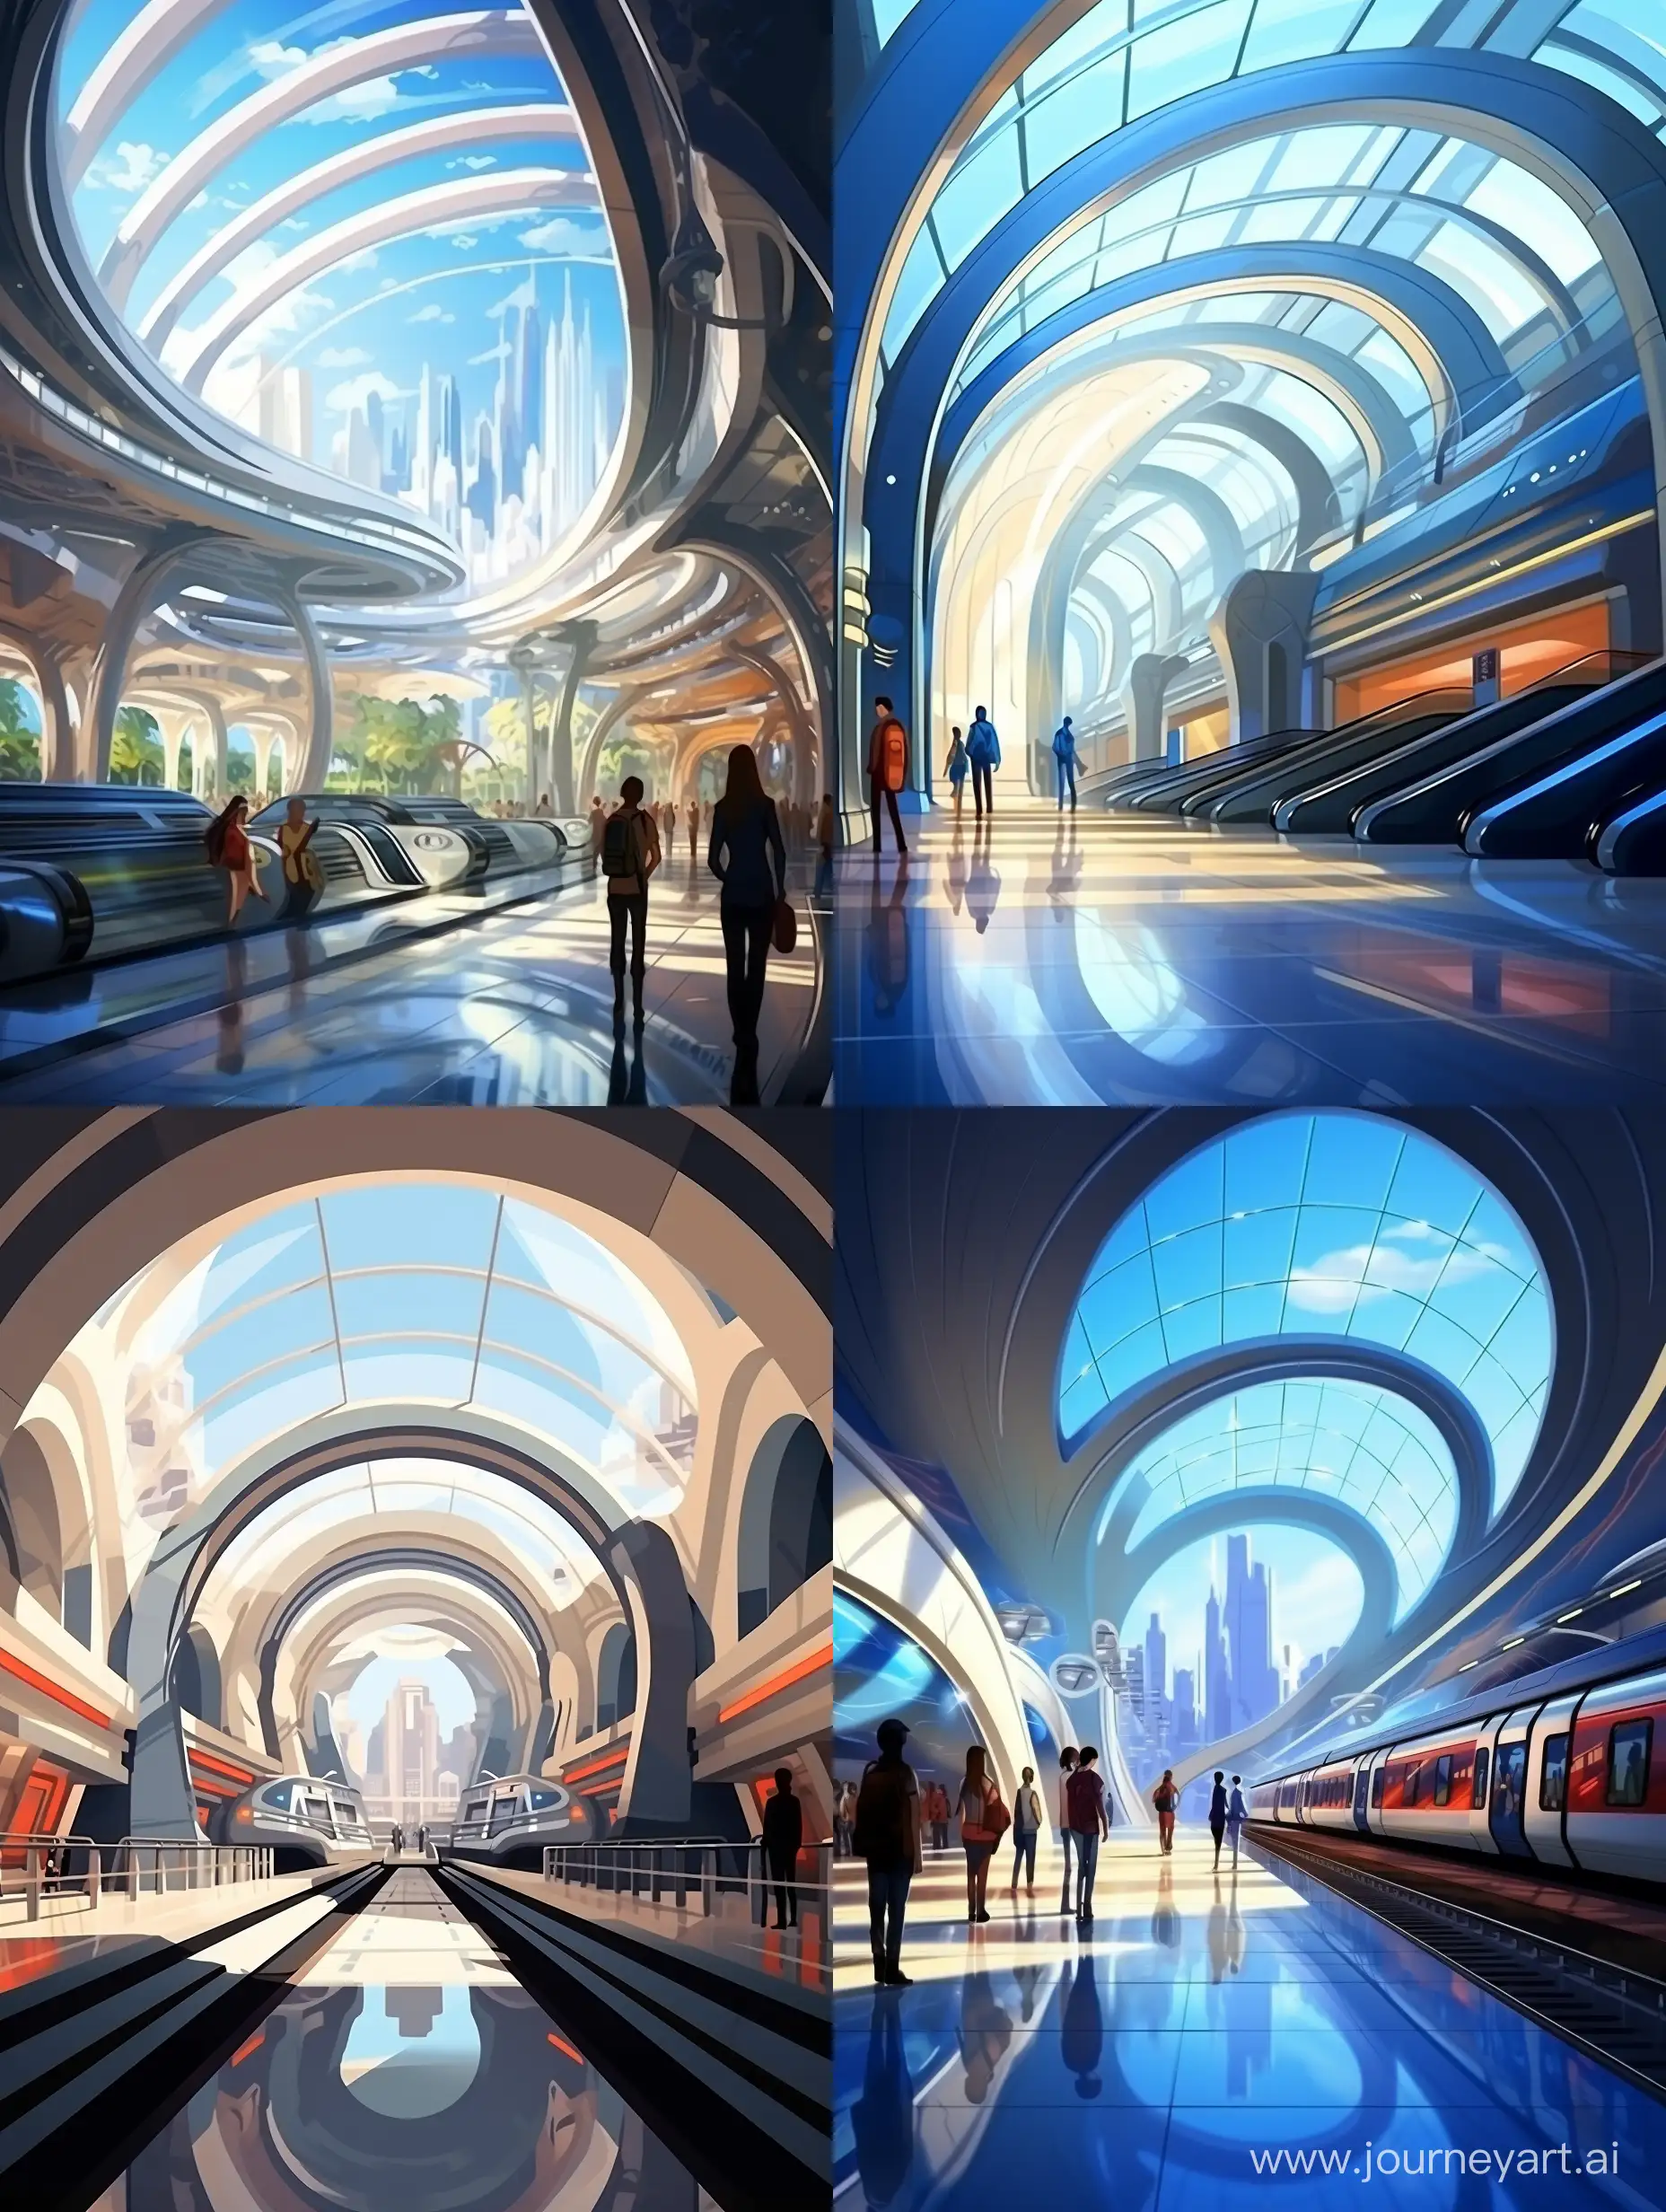 Futuristic-Metro-Station-with-Slender-Columns-and-Commuters-Waiting